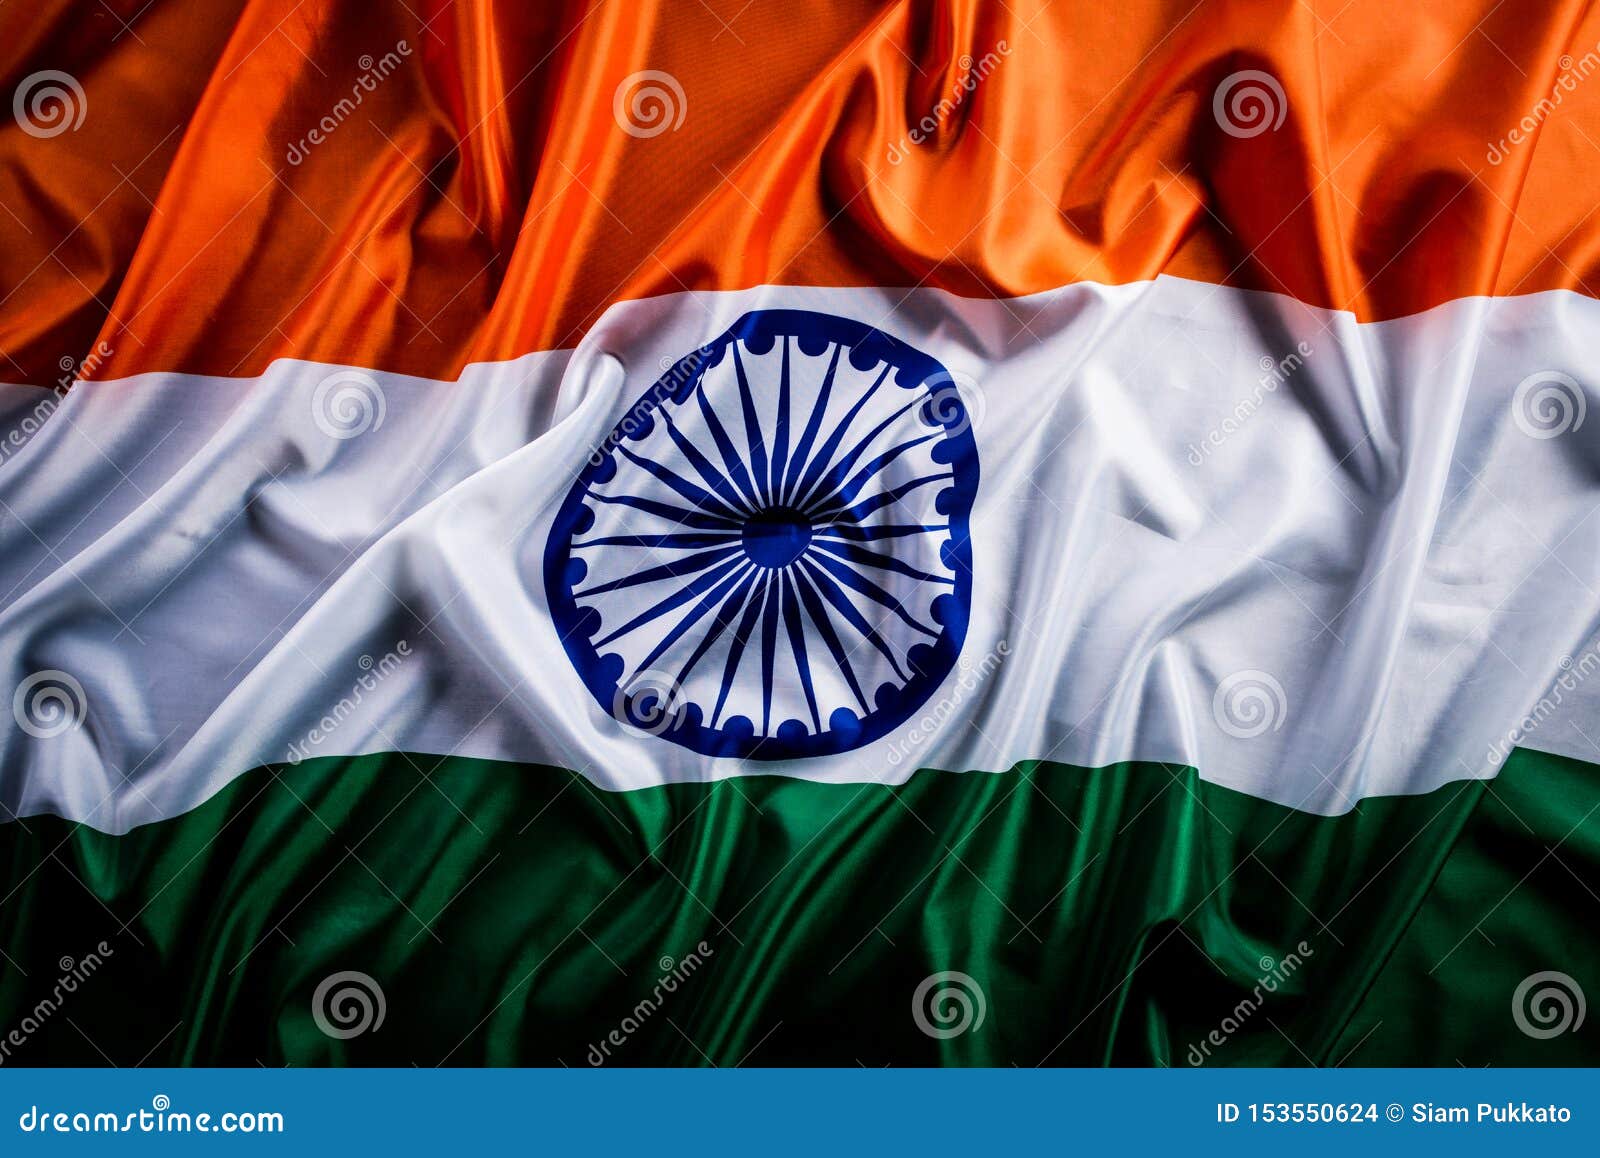 Top View of National Flag of India on Wooden Background. Indian ...